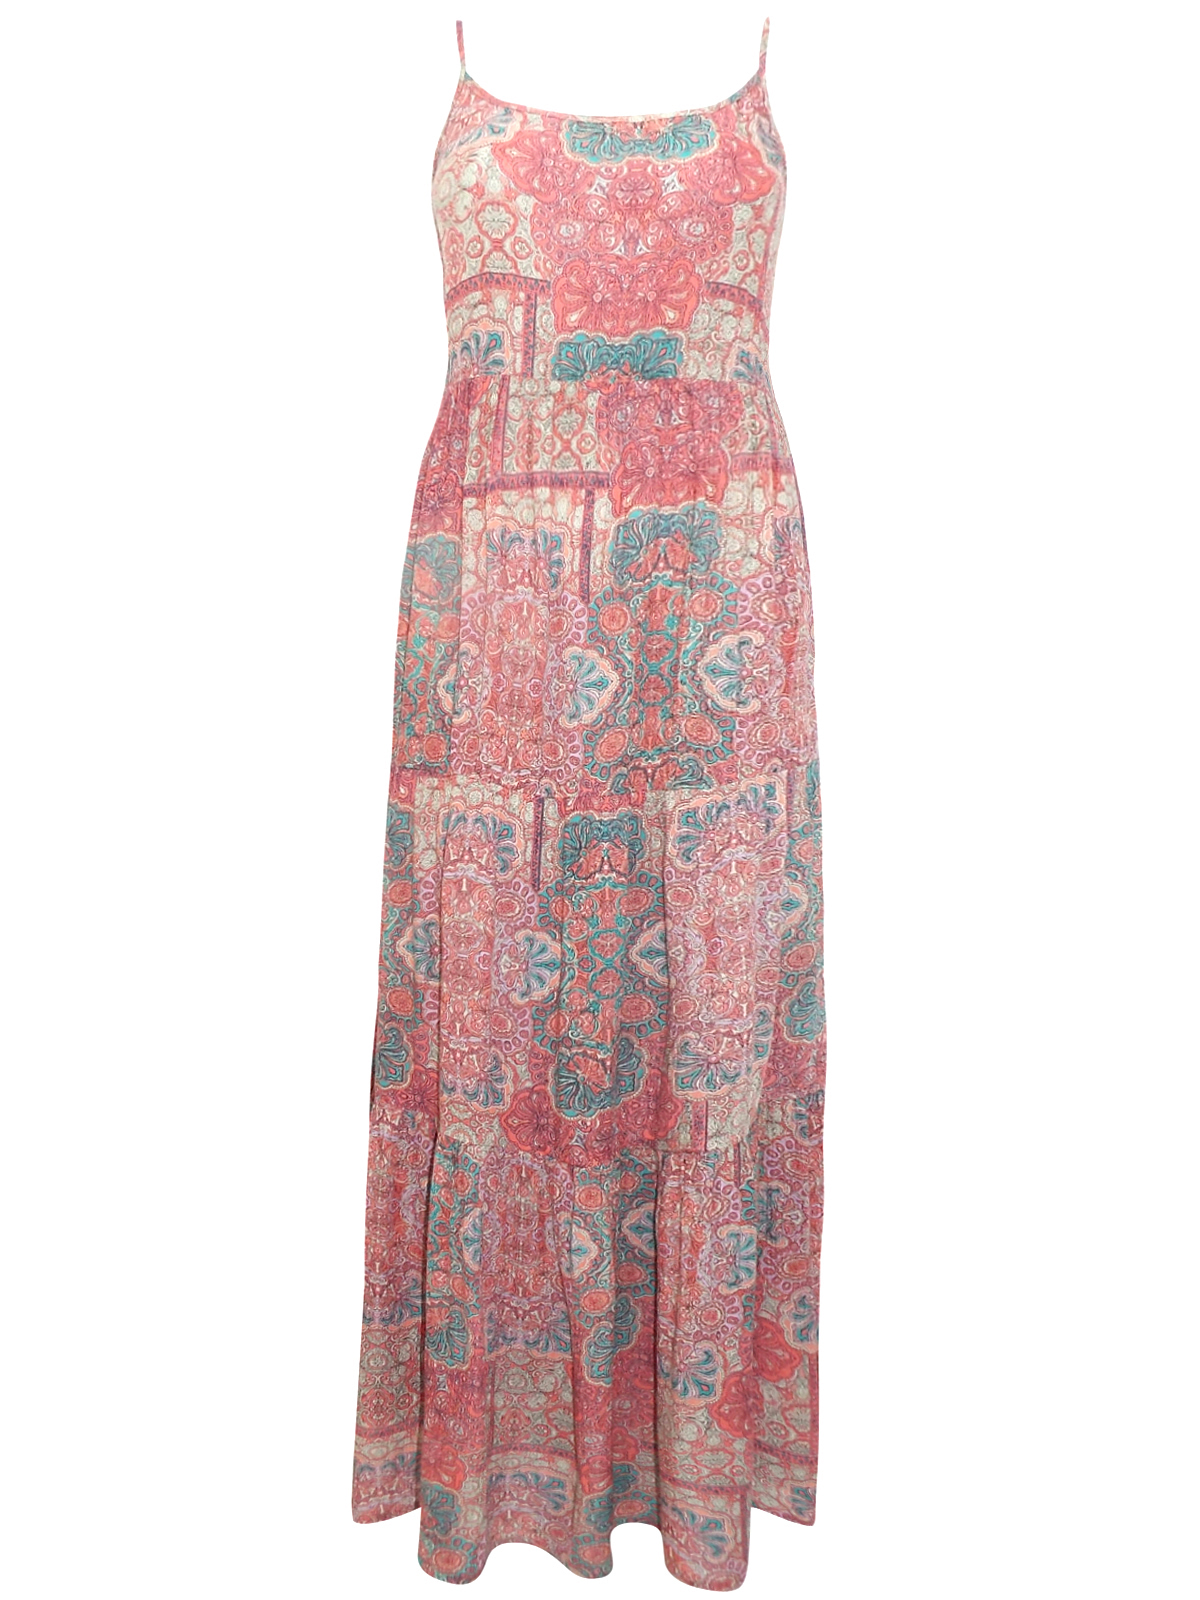 N3xt PINK Tile Patchwork Panelled Maxi Dress - Size 6 to 18 (Petite ...